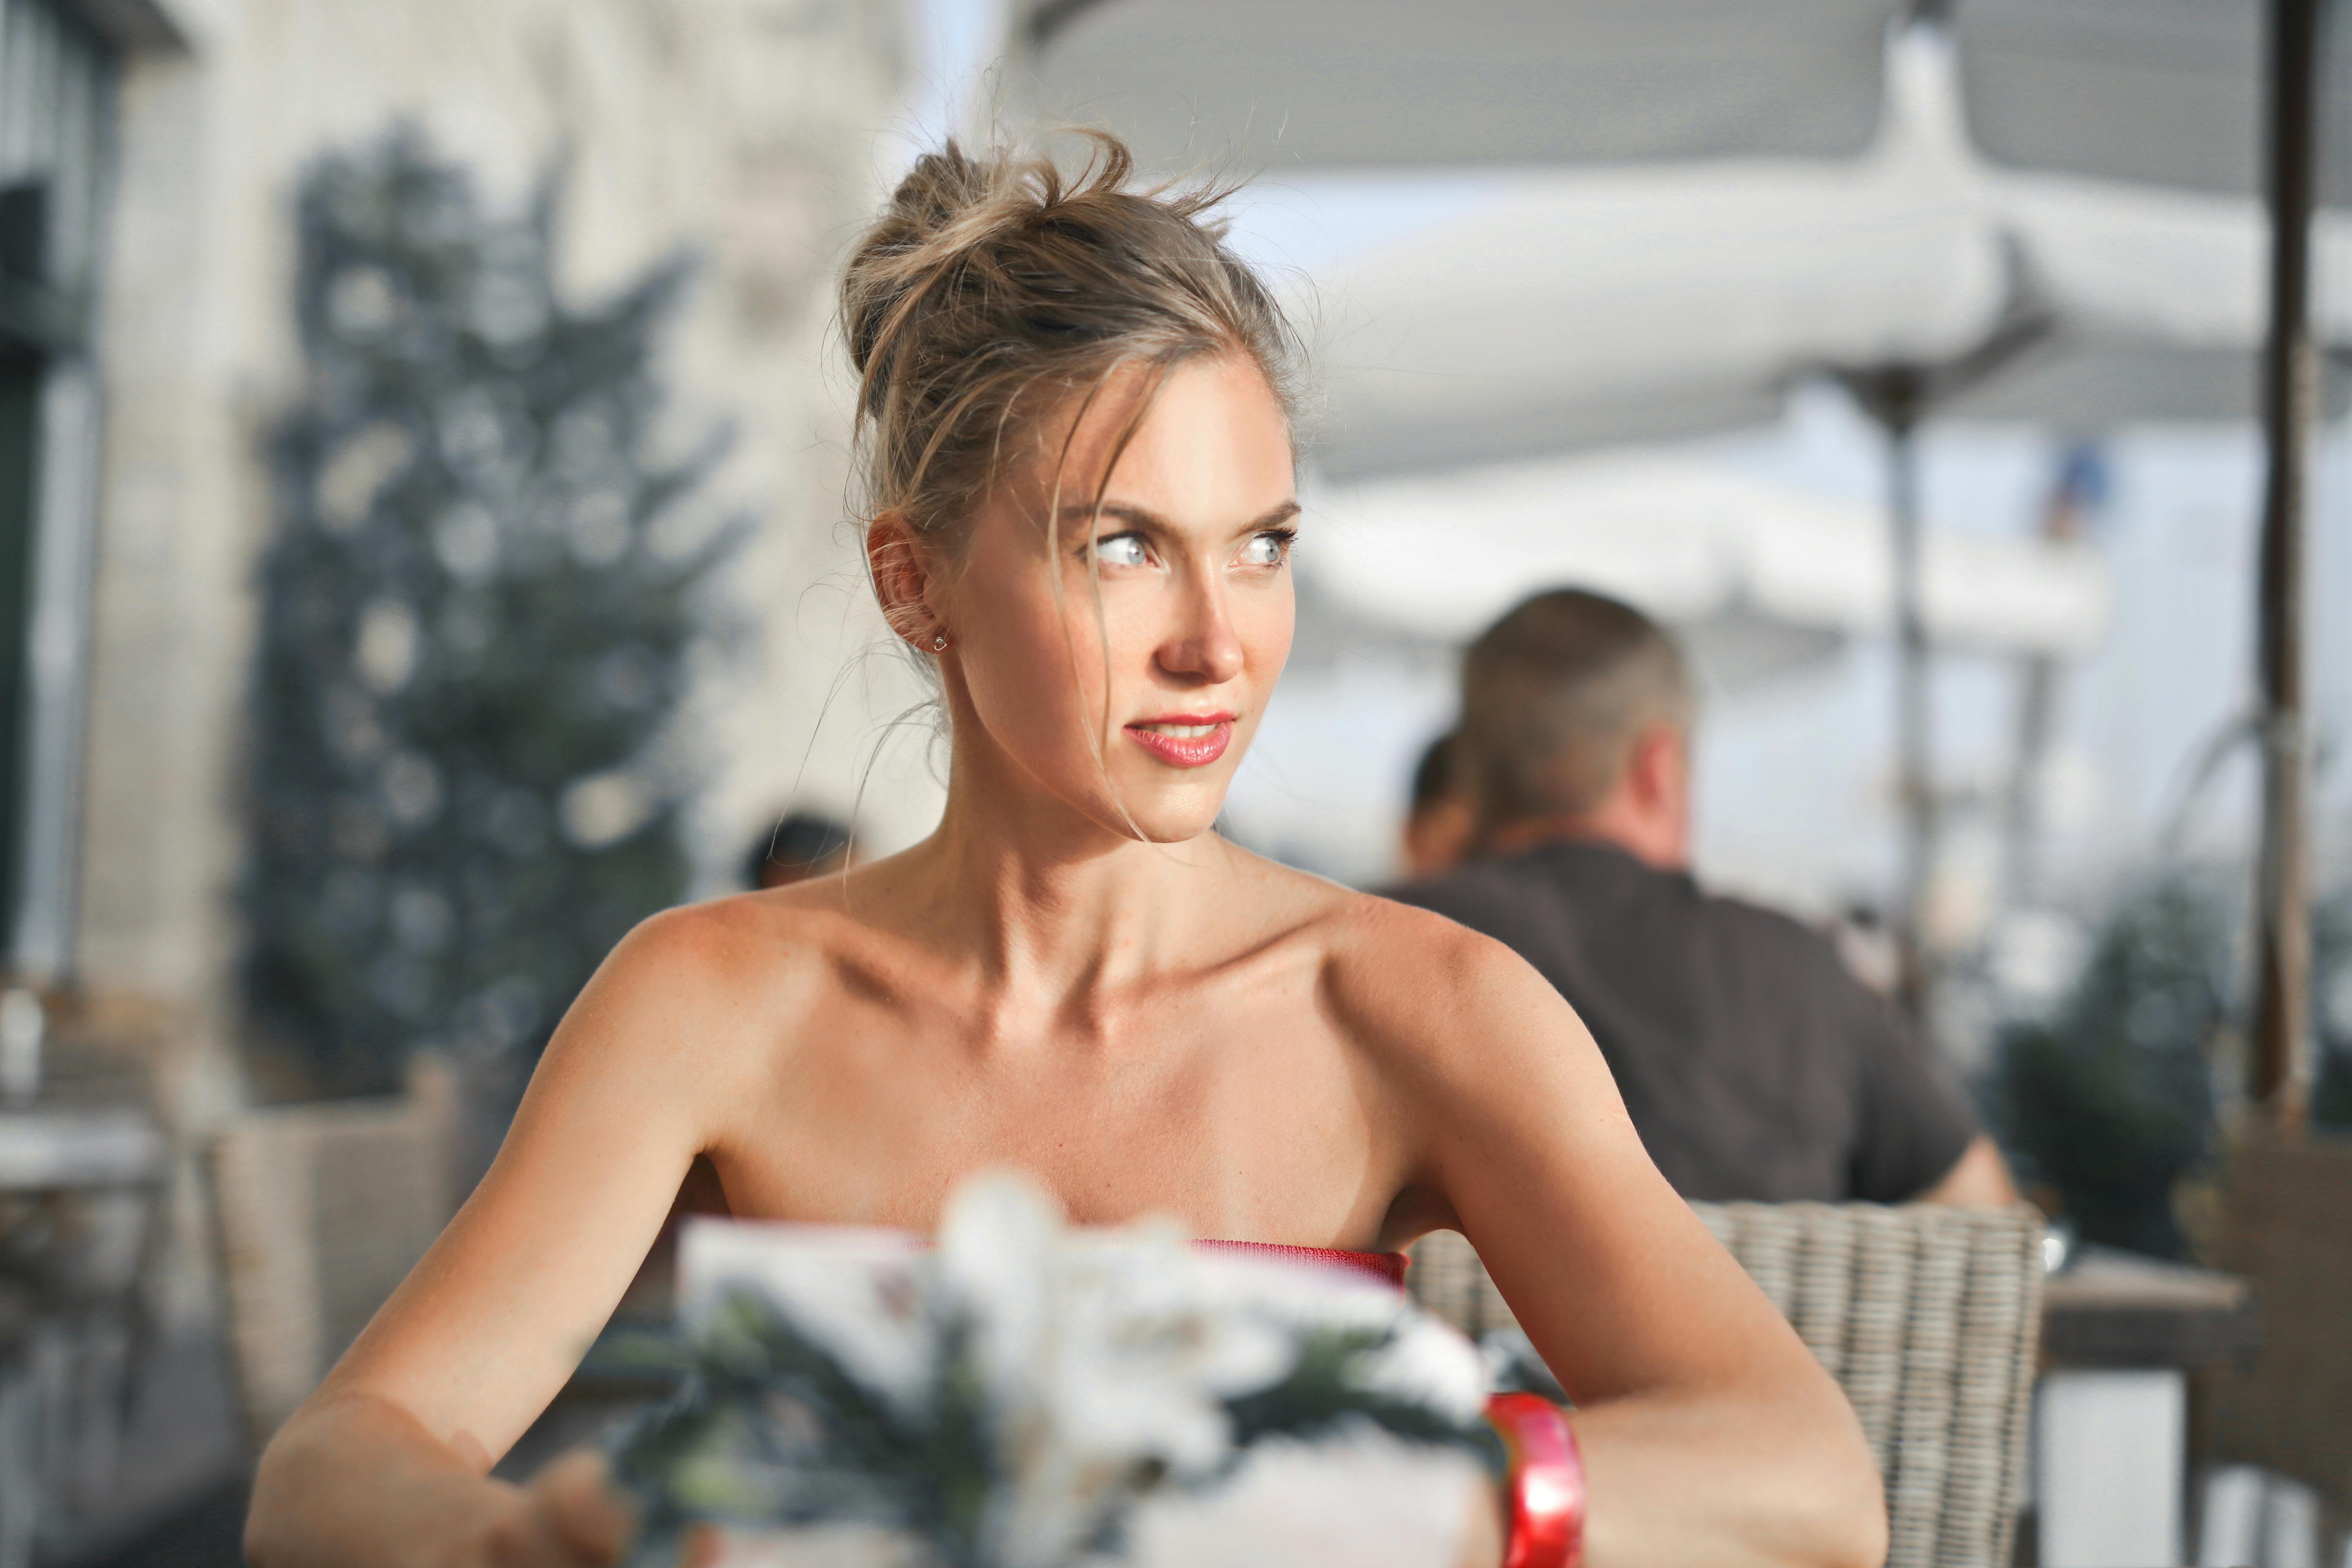 A confused woman in a restaurant | Source: Pexels